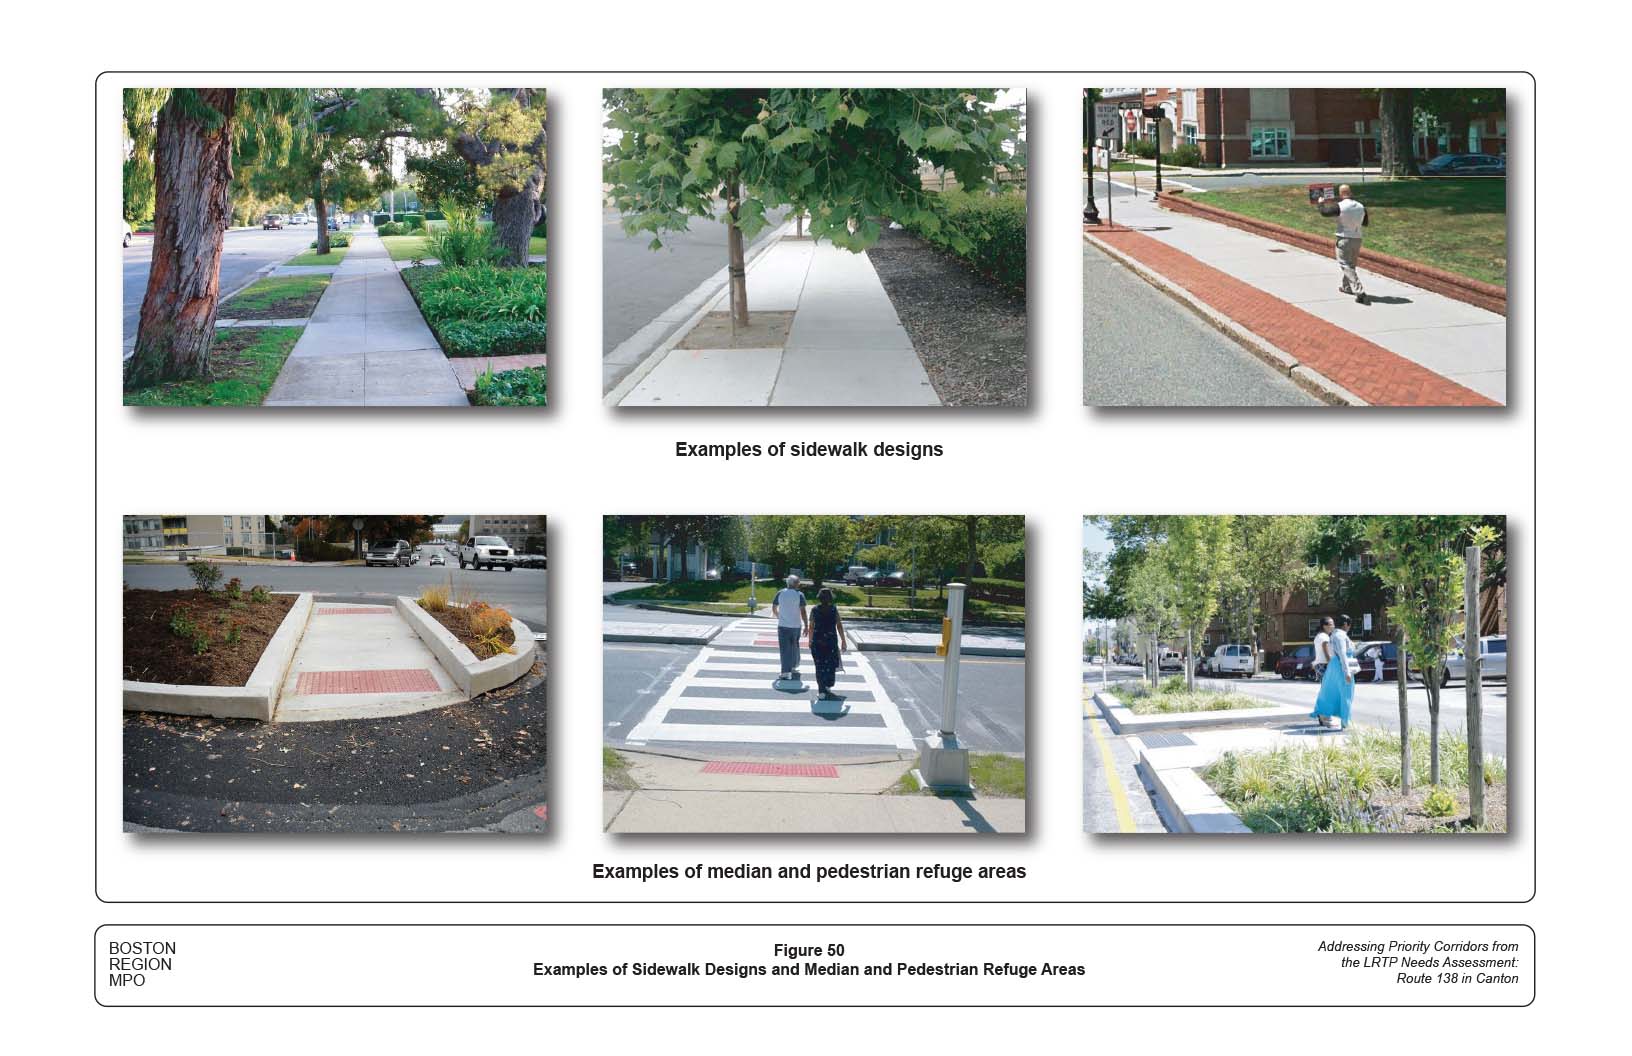 Figure 50 contains six photographs showing examples of sidewalk designs and median and pedestrian refuge areas.